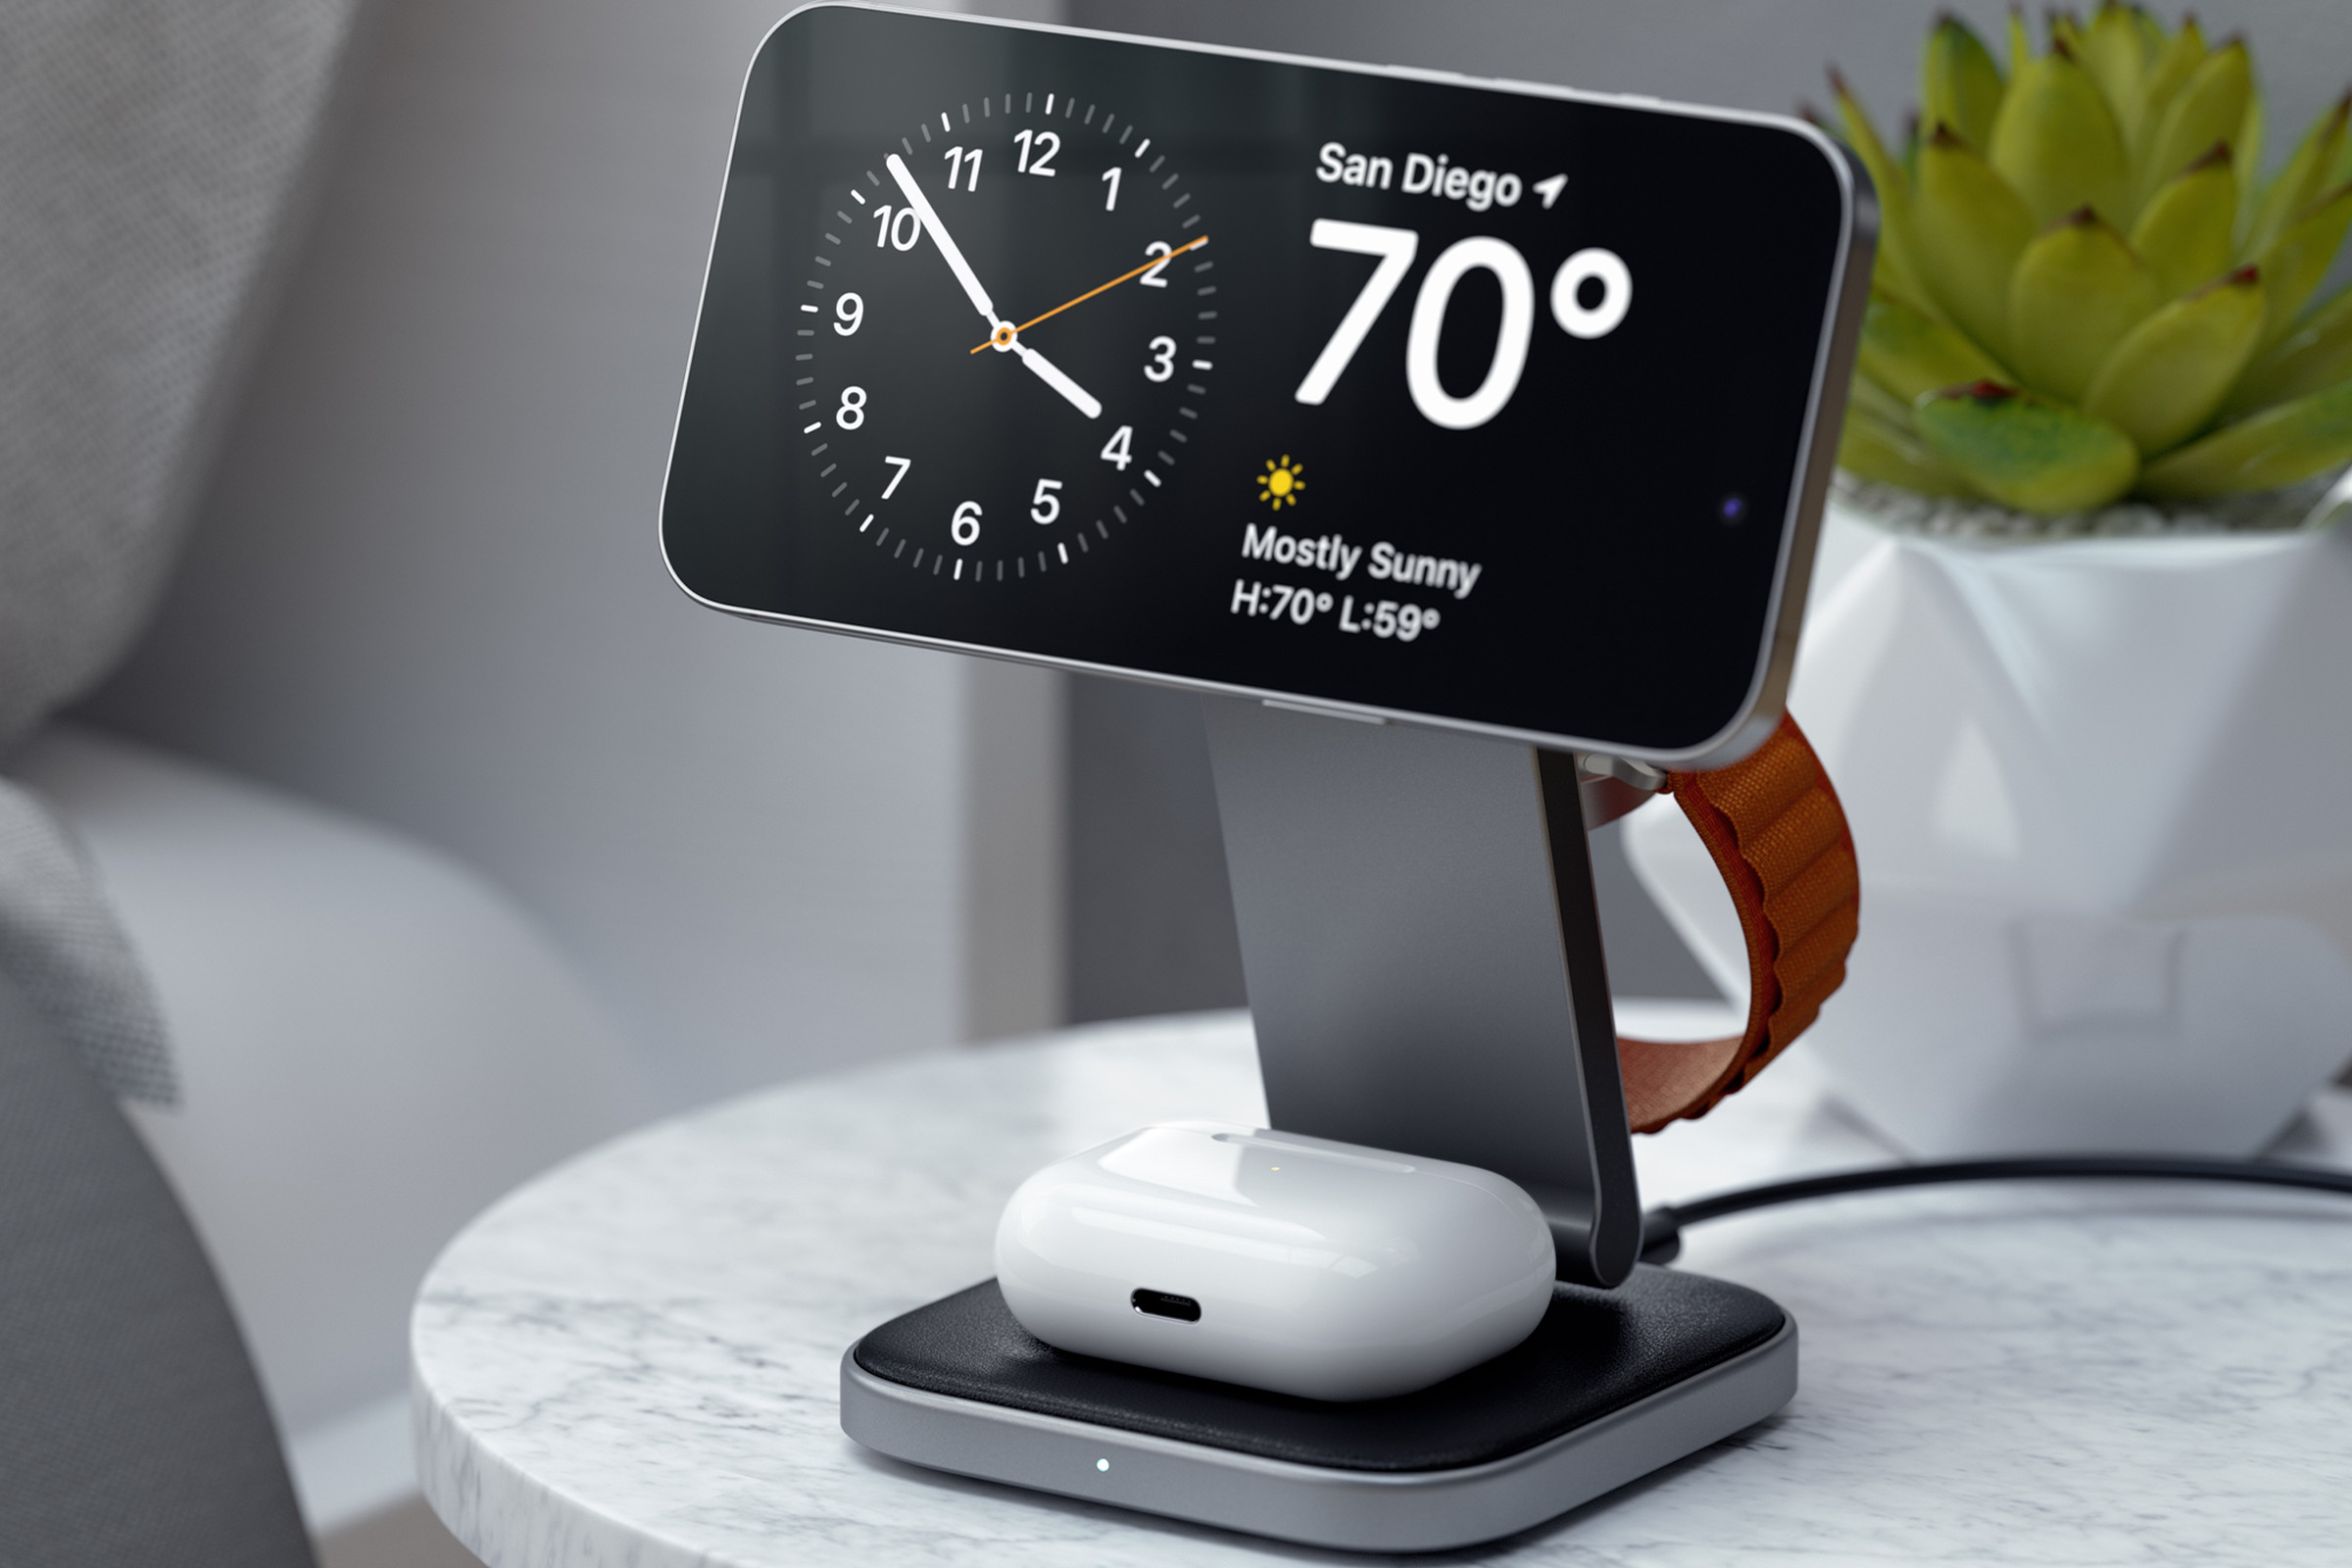 A picture of an iPhone in landscape mode on a charging stand, suspended above an AirPods Pro case, with an Apple Watch Ultra band just visible suspended from the charging puck on the back of the stand.